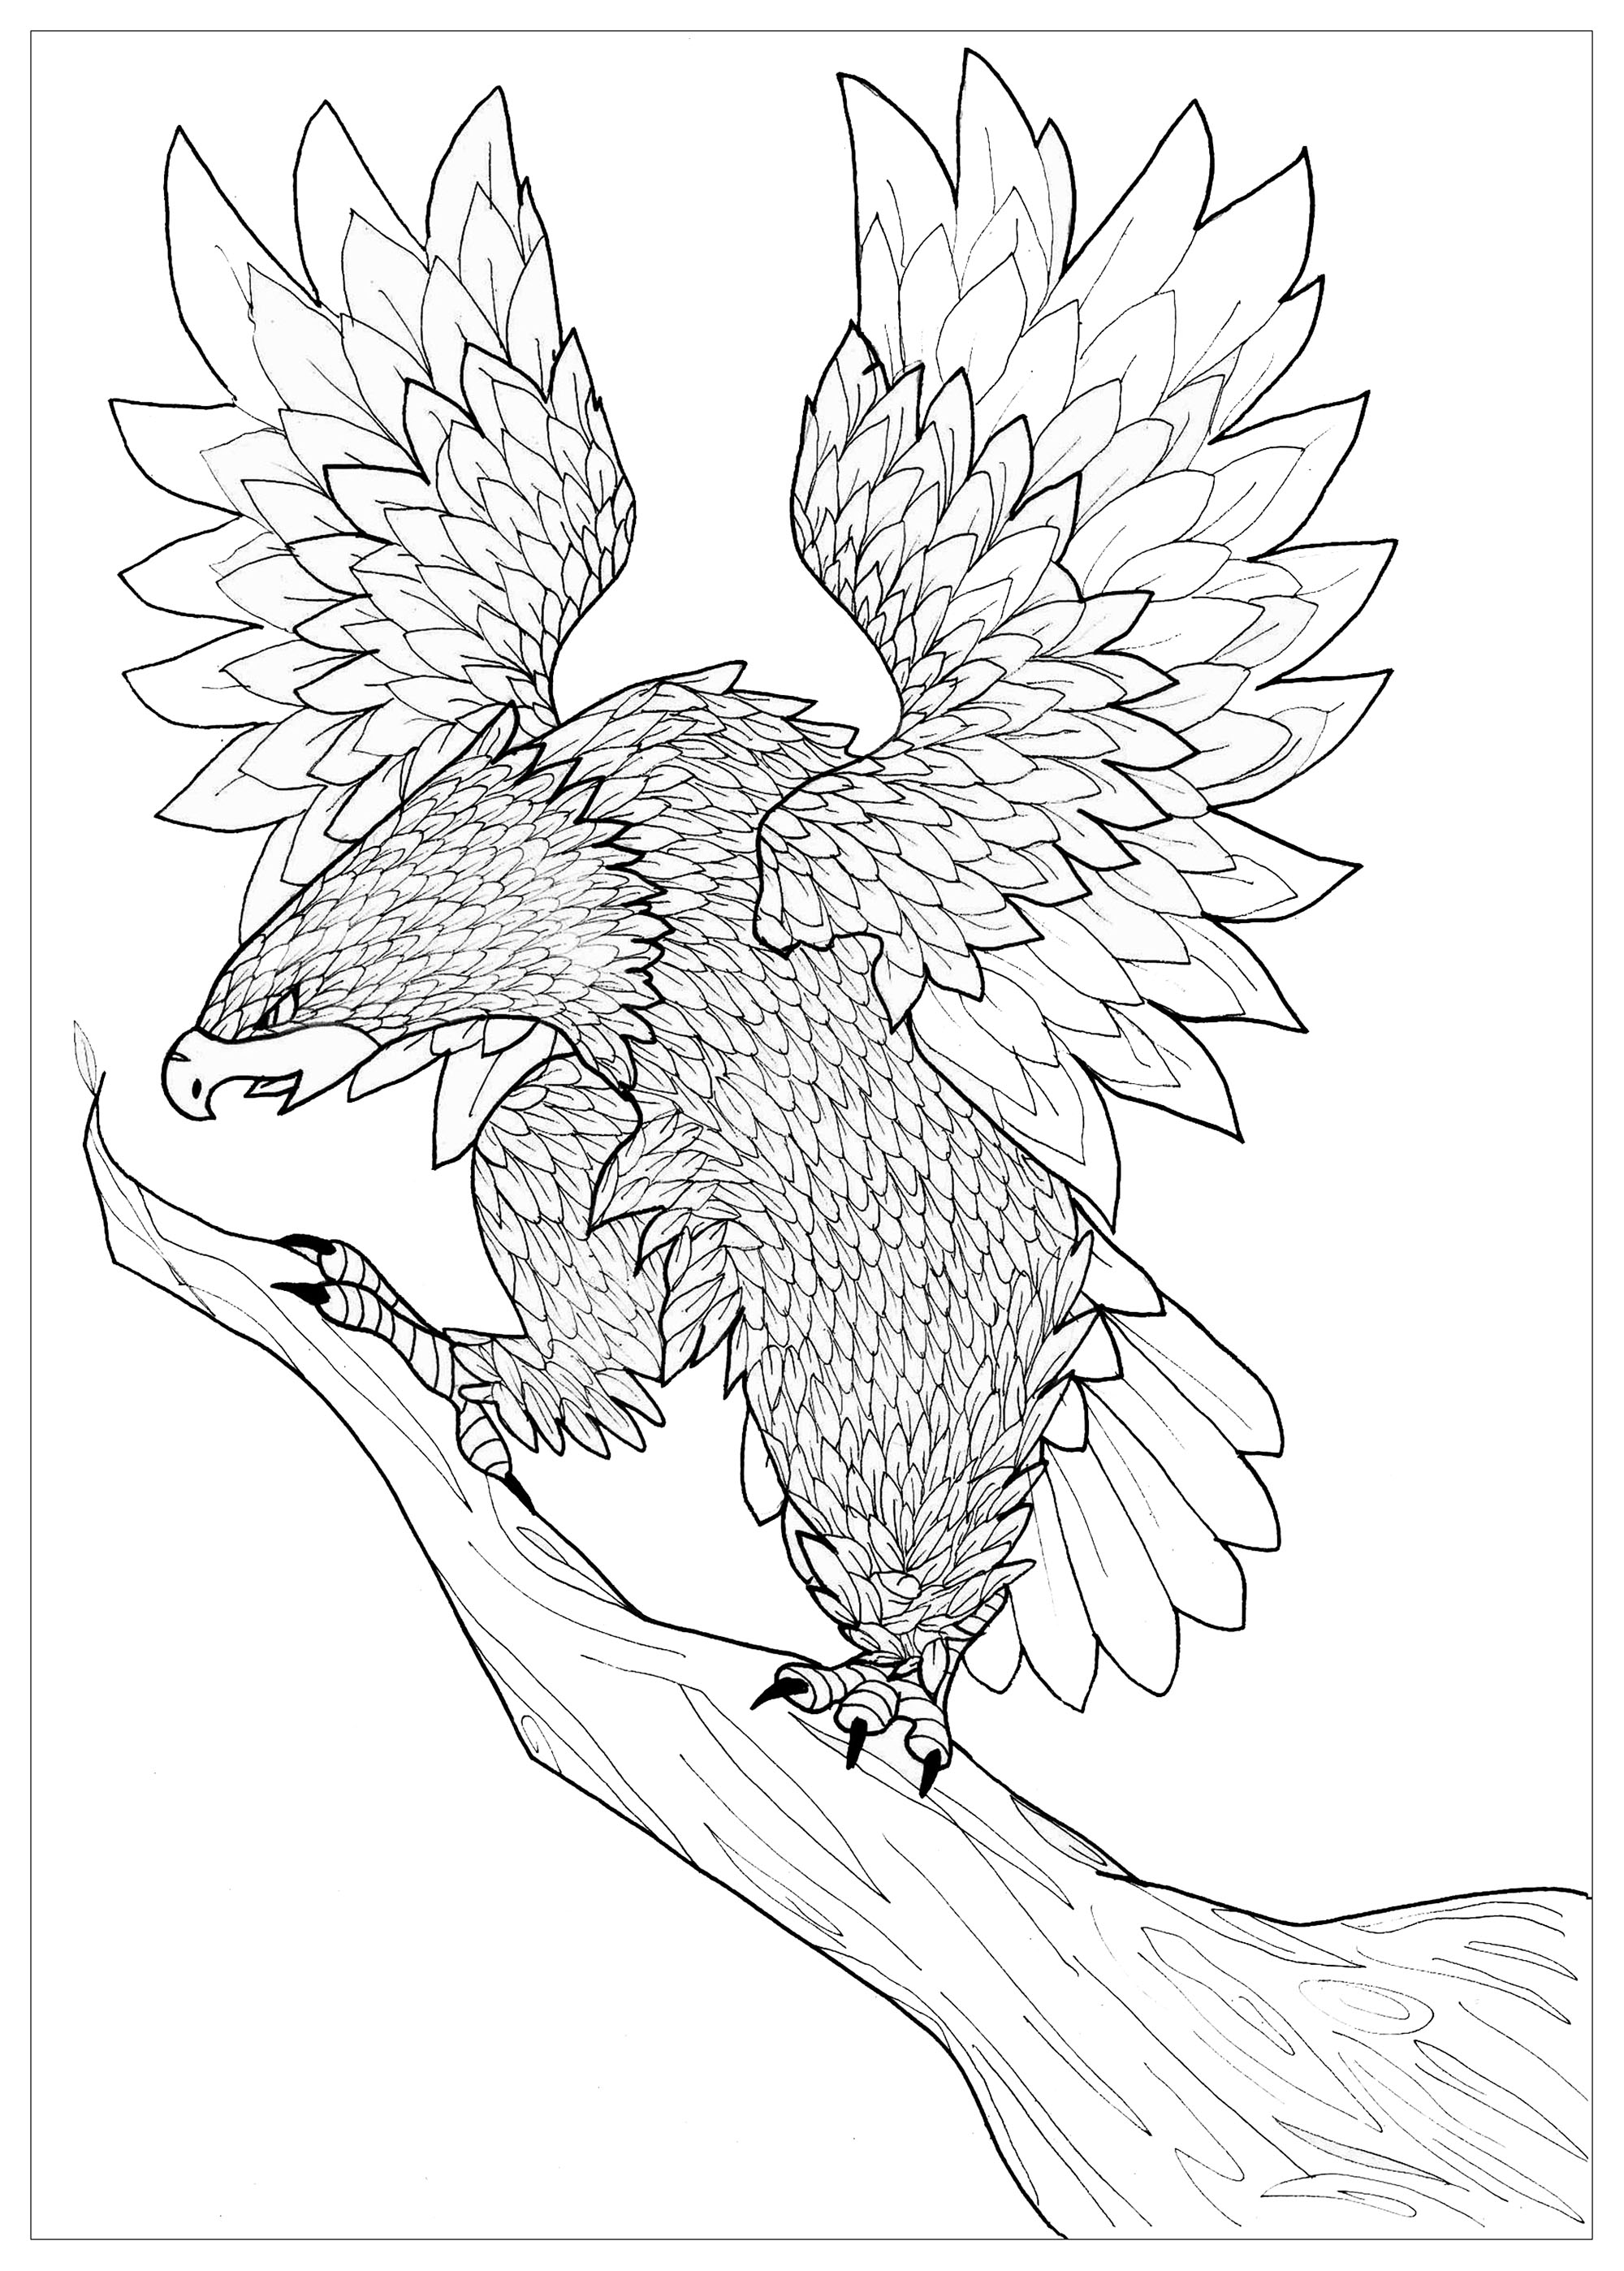 egal coloring pages